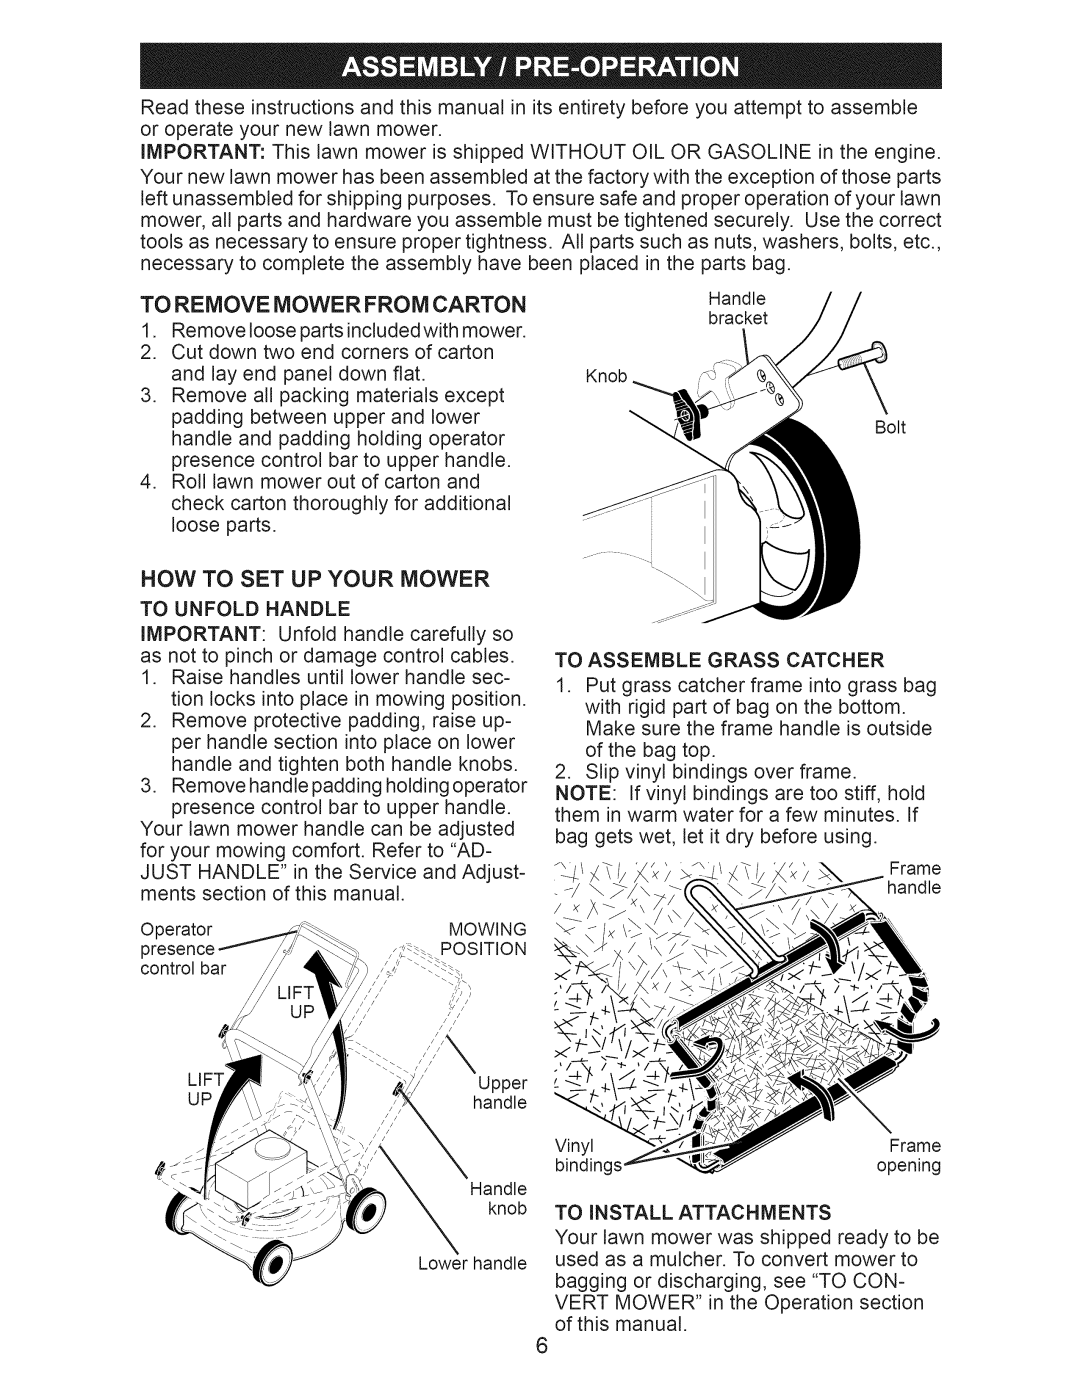 Craftsman 917.376406 owner manual To Remove Mower From Carton, Now To Set Up Your Mower 